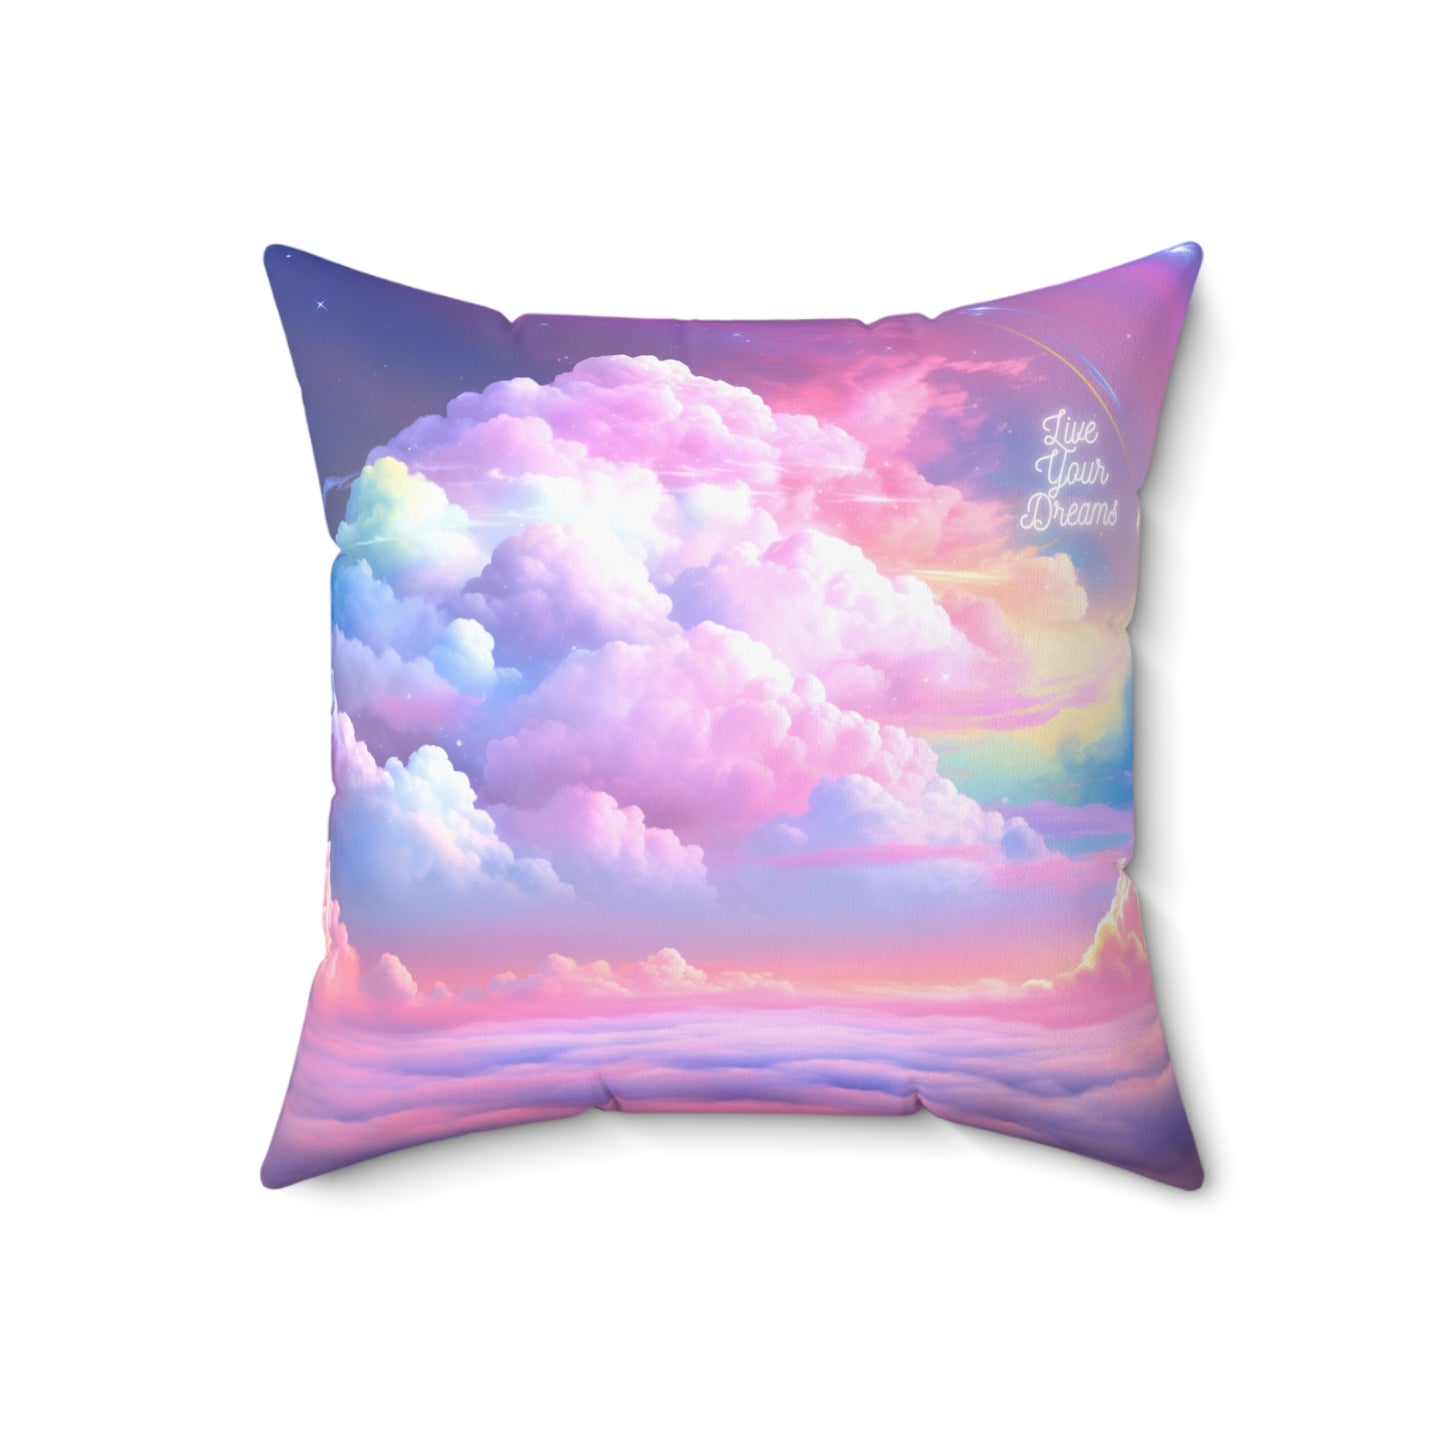 Rainbow Dreams Plush Pillow From Big Fairy Tales By Schatar